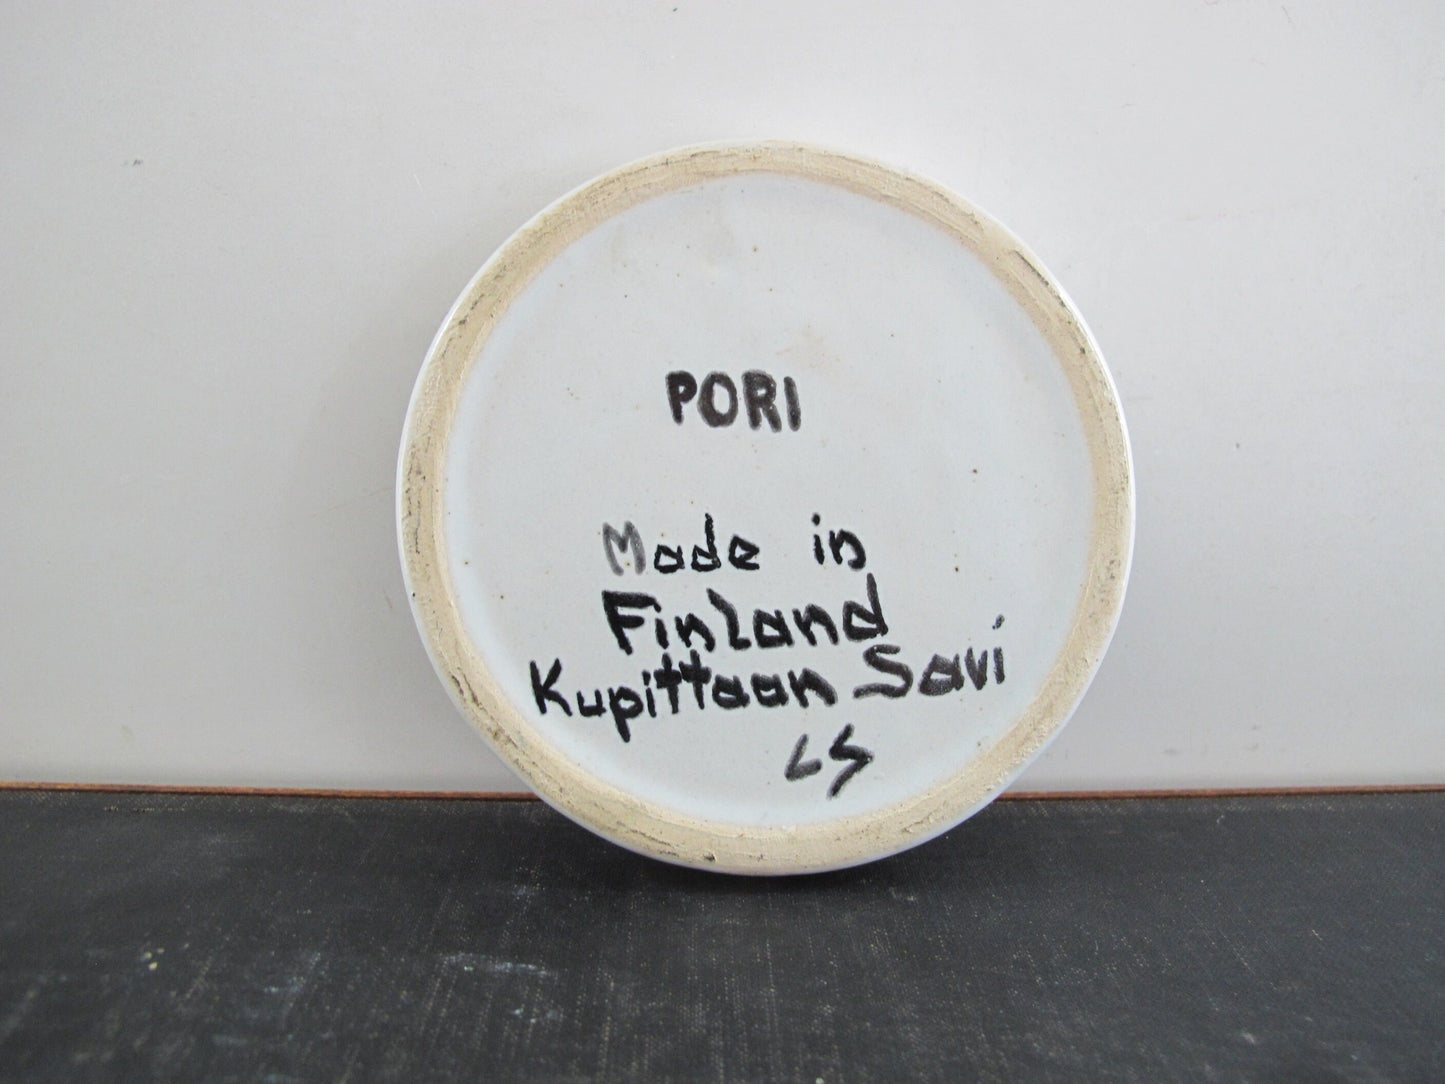 Finnish Art Pottery Kupittaan Savi Architectural Roundels Showing Modernist Buildings and Church c. 1950s 1960s